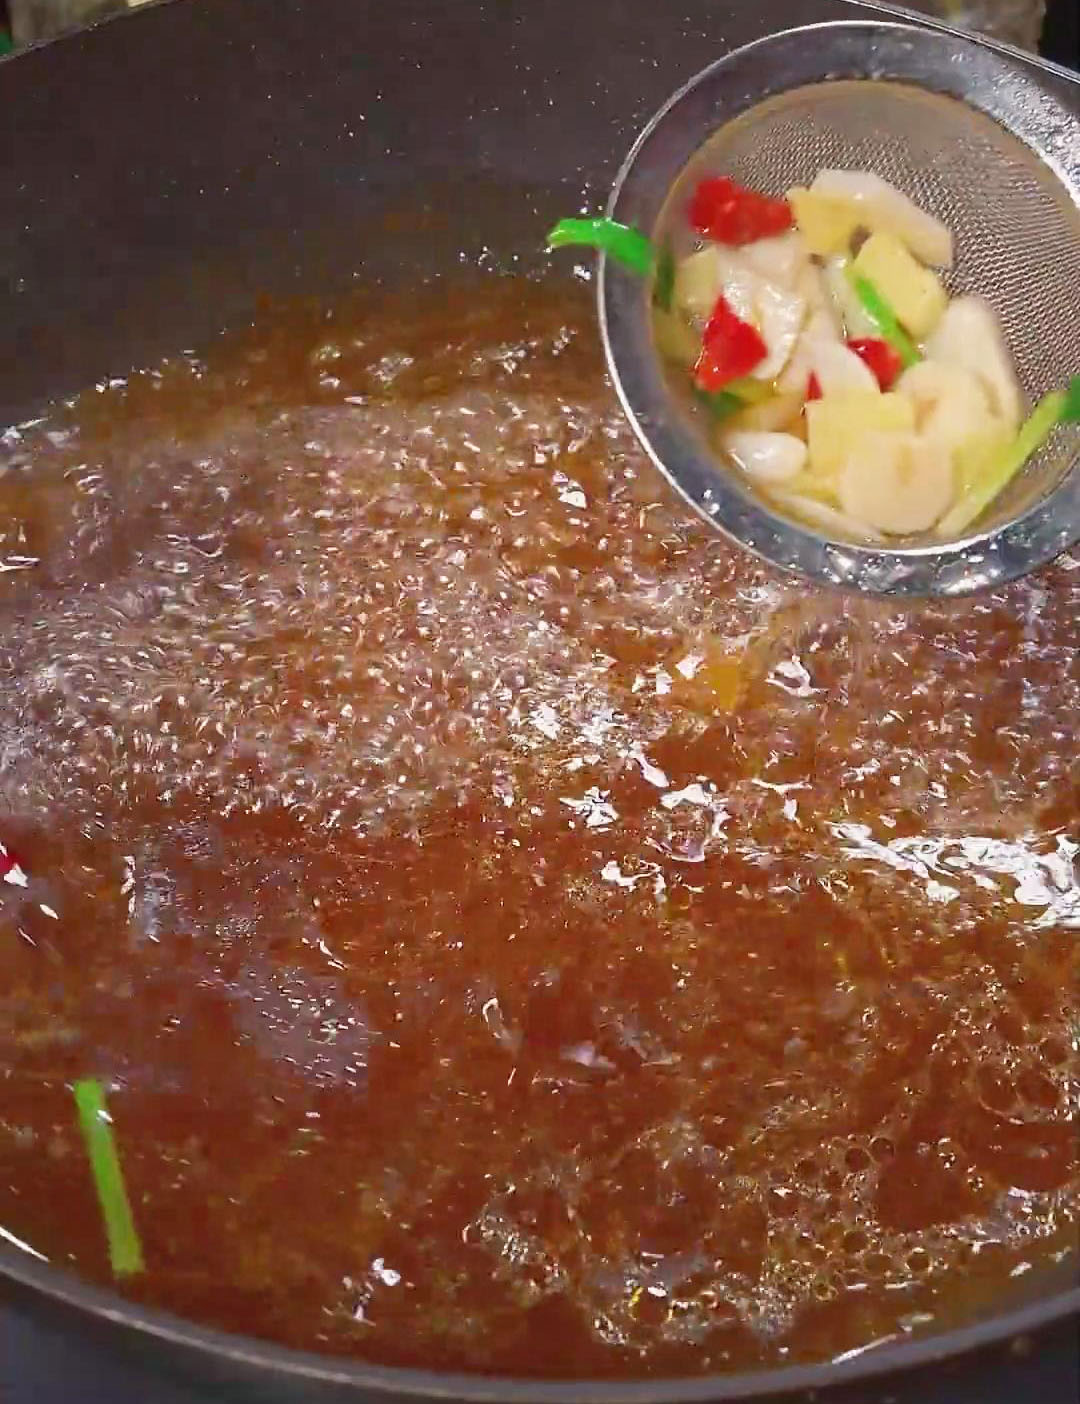 remove the pieces of ginger, green onions, and dried peppers using a strainer